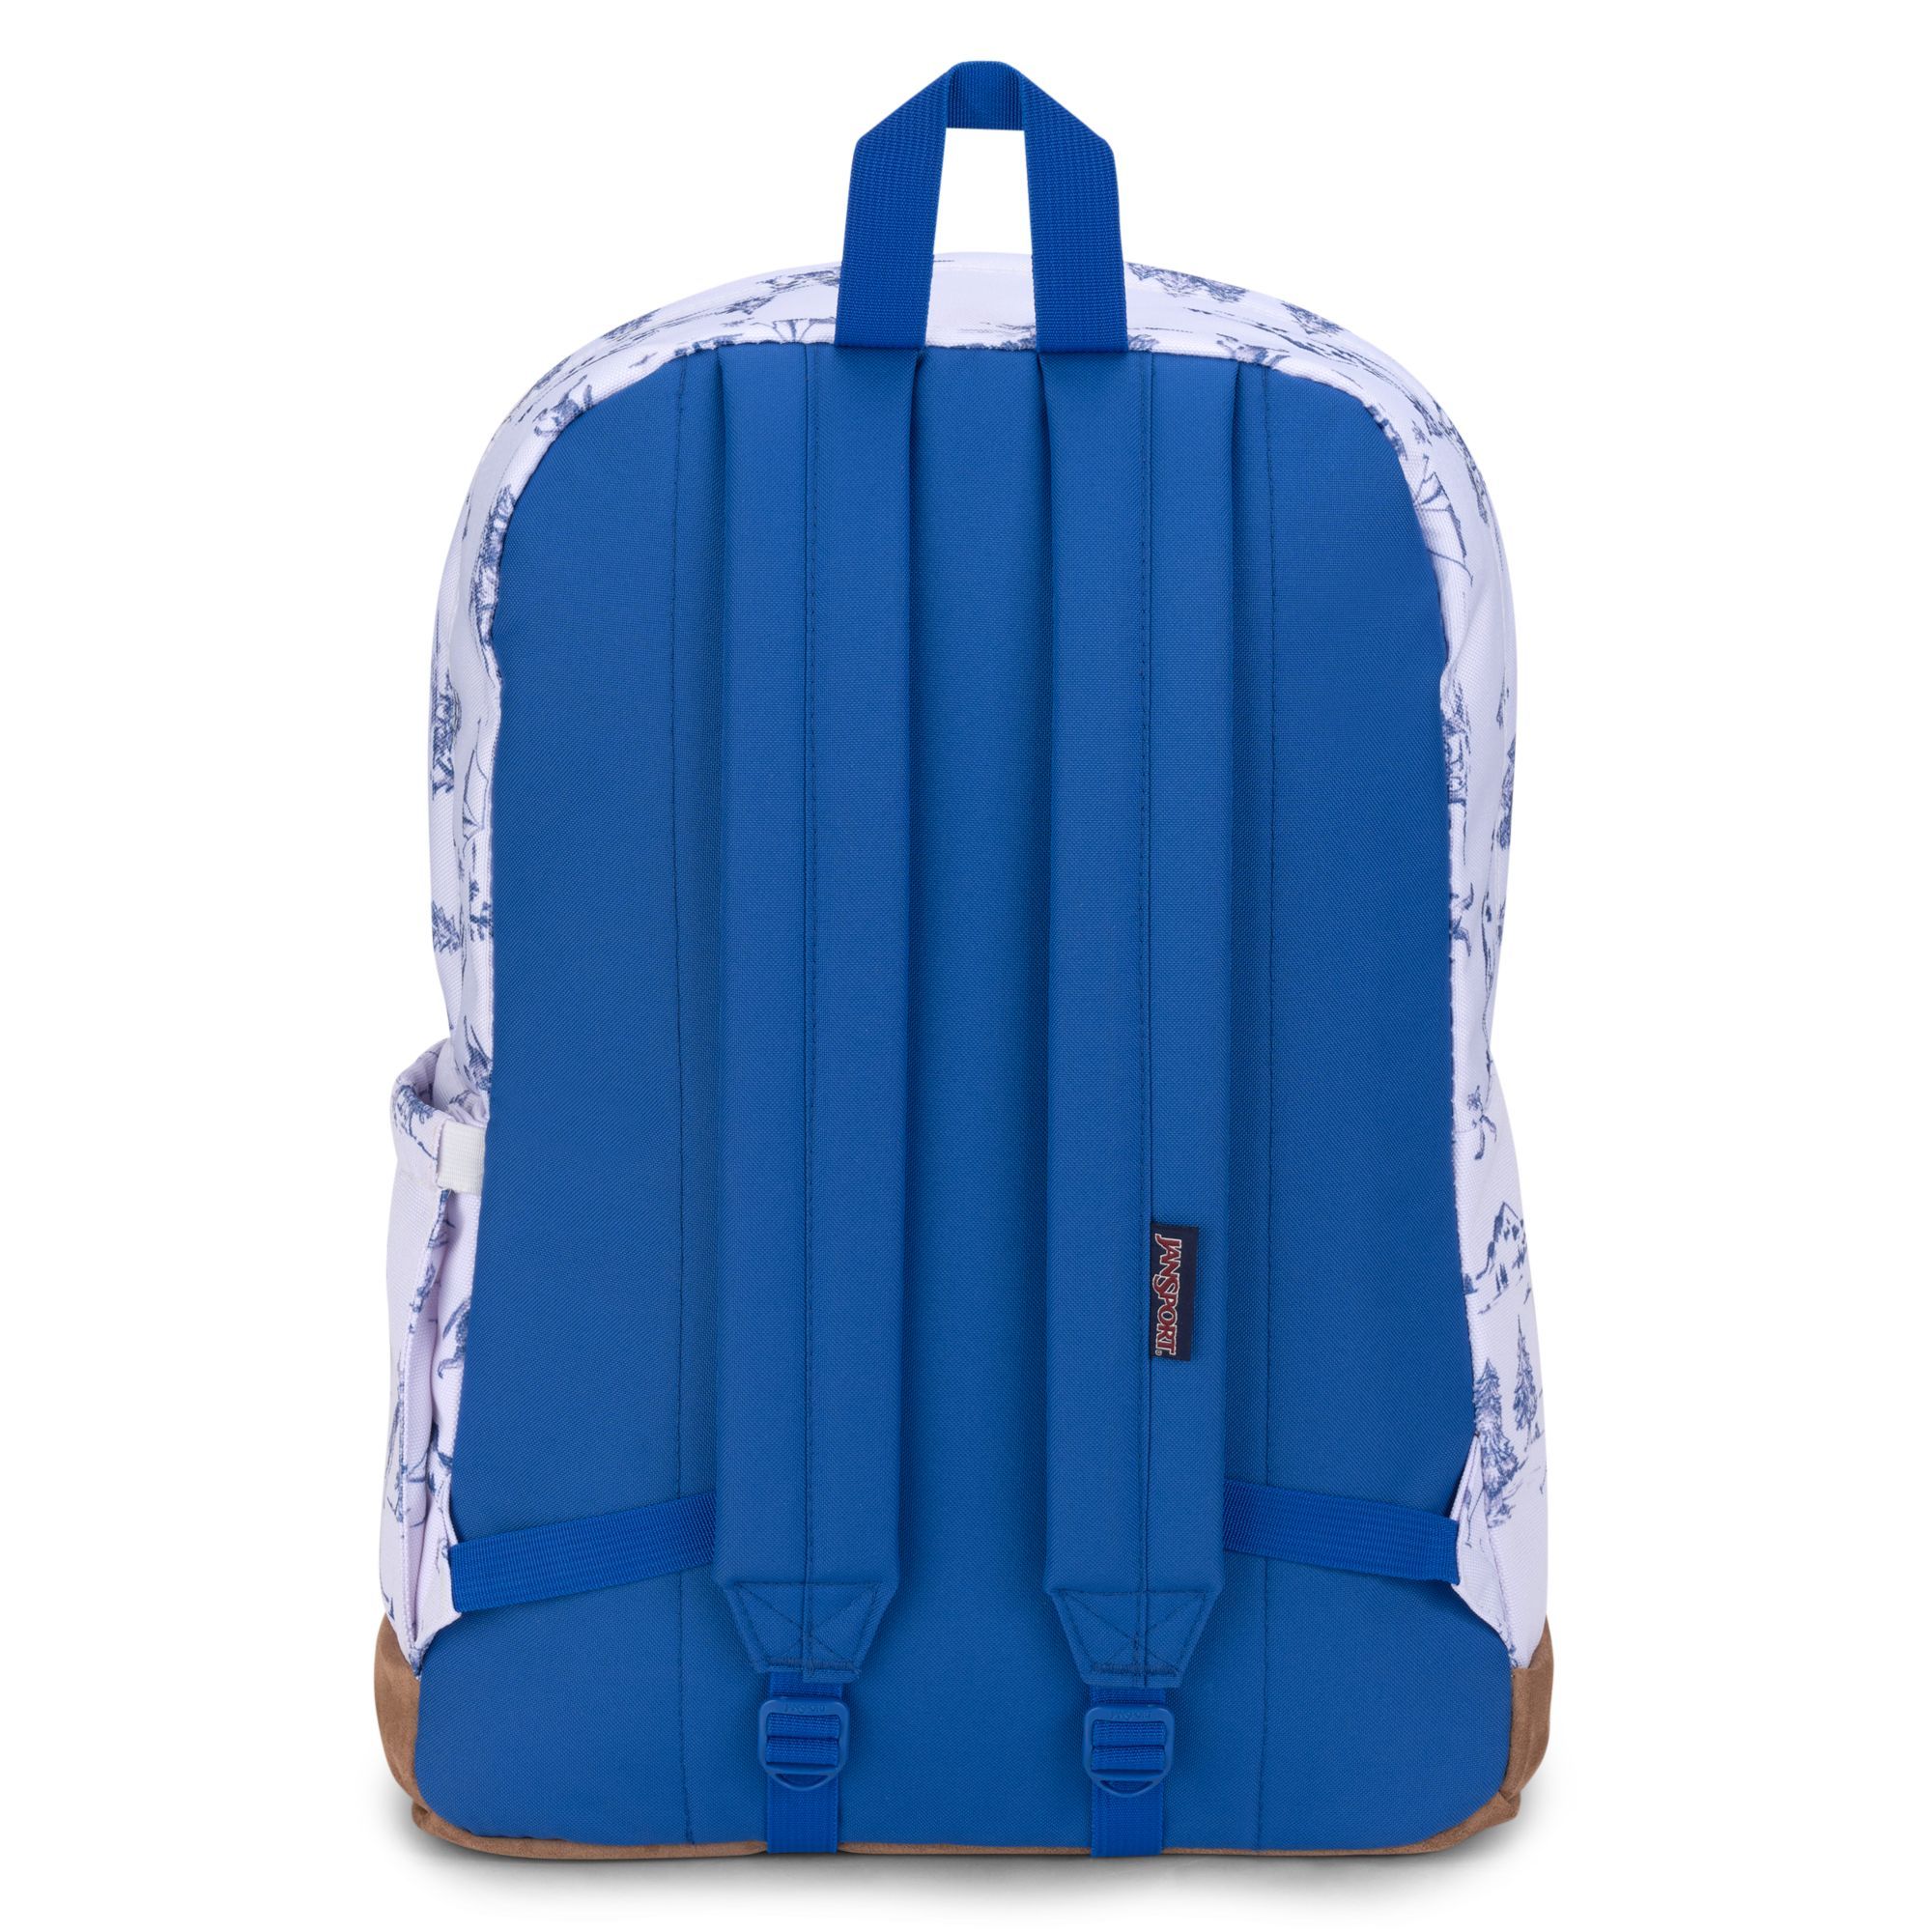  JanSport Right Pack Backpack - Lost Sasquatch 